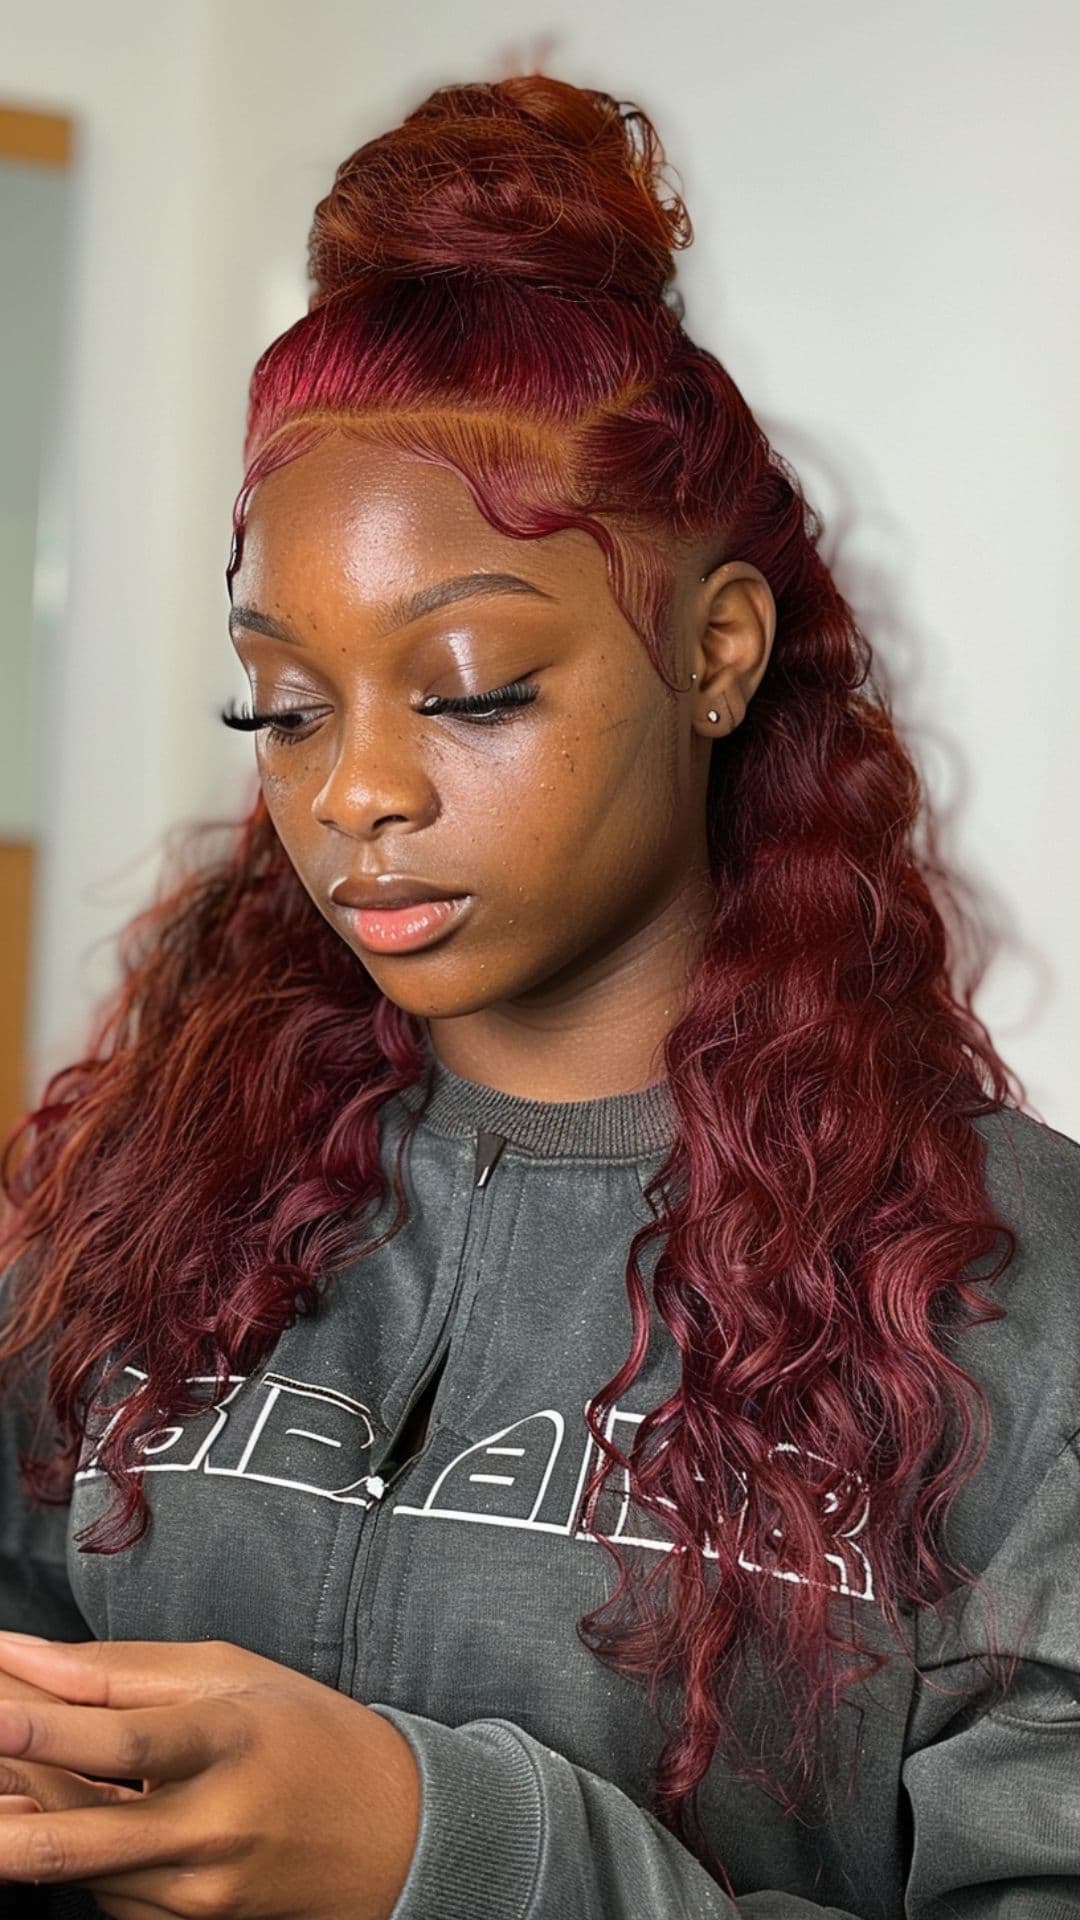 A black woman modelling a cherry red hair.